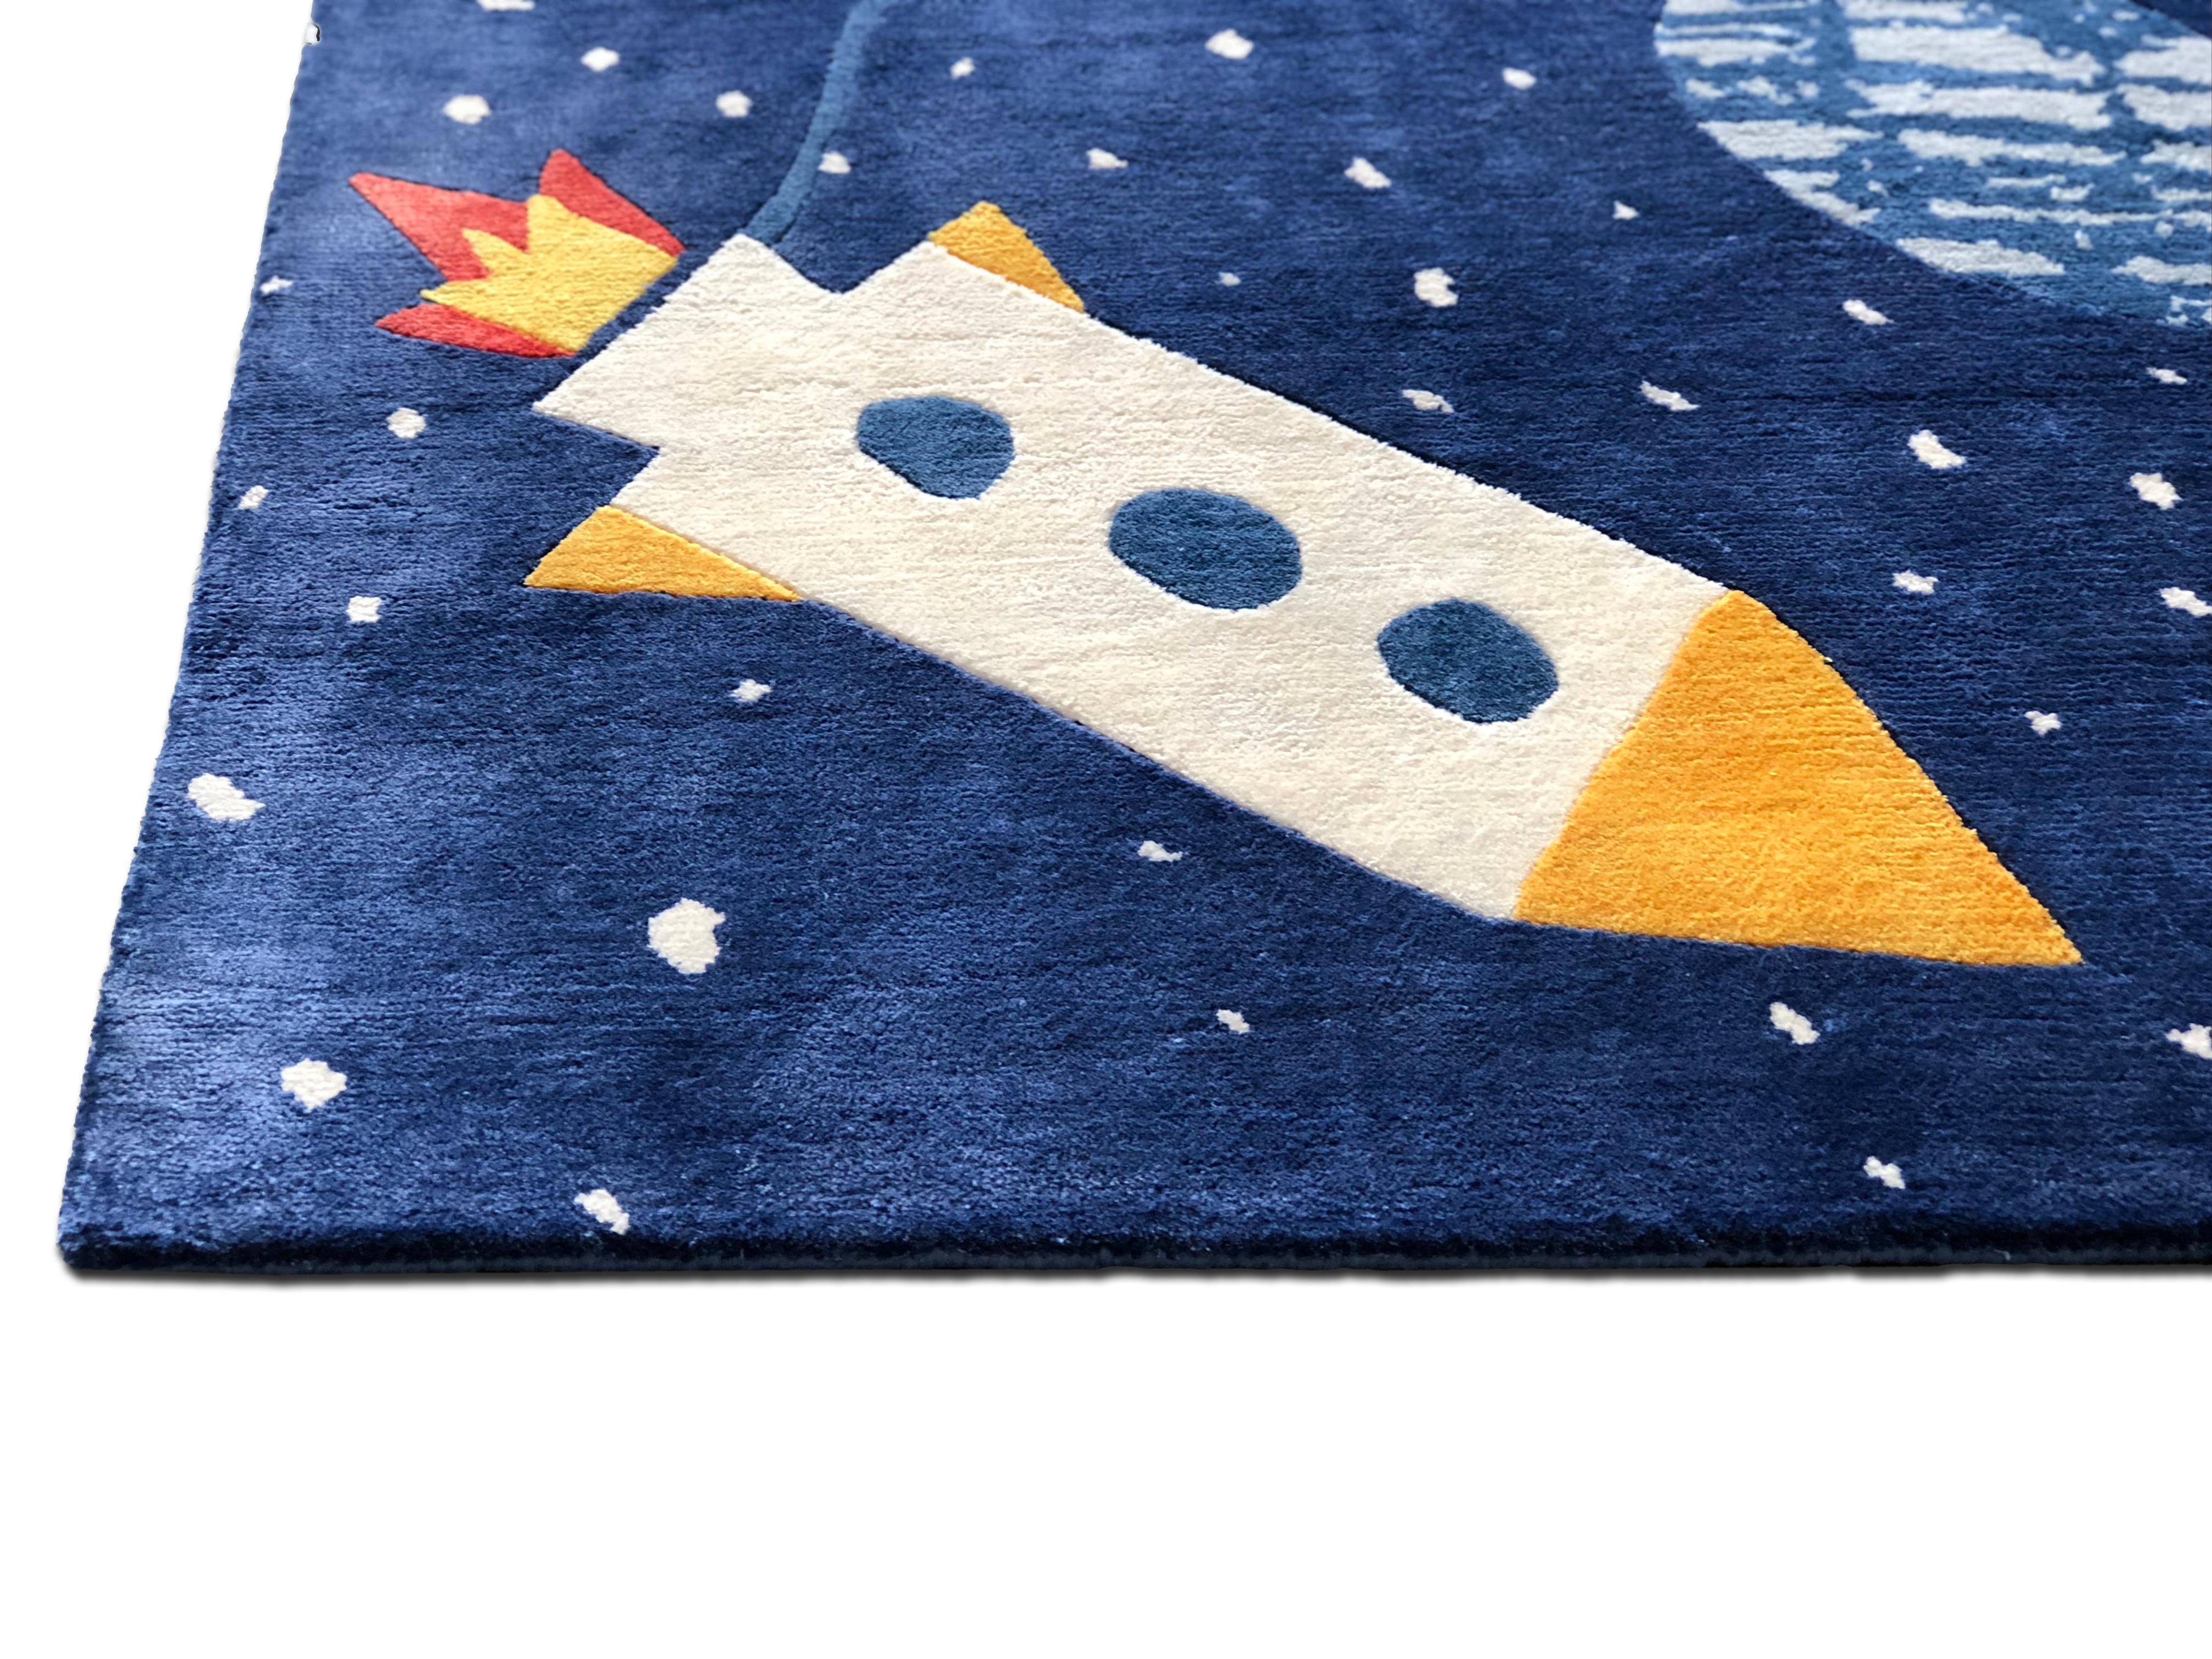 Hand-Knotted Space Ace Rug by Daria Solak, Hand Knotted, 100% New Zealand Wool 250x312cm For Sale